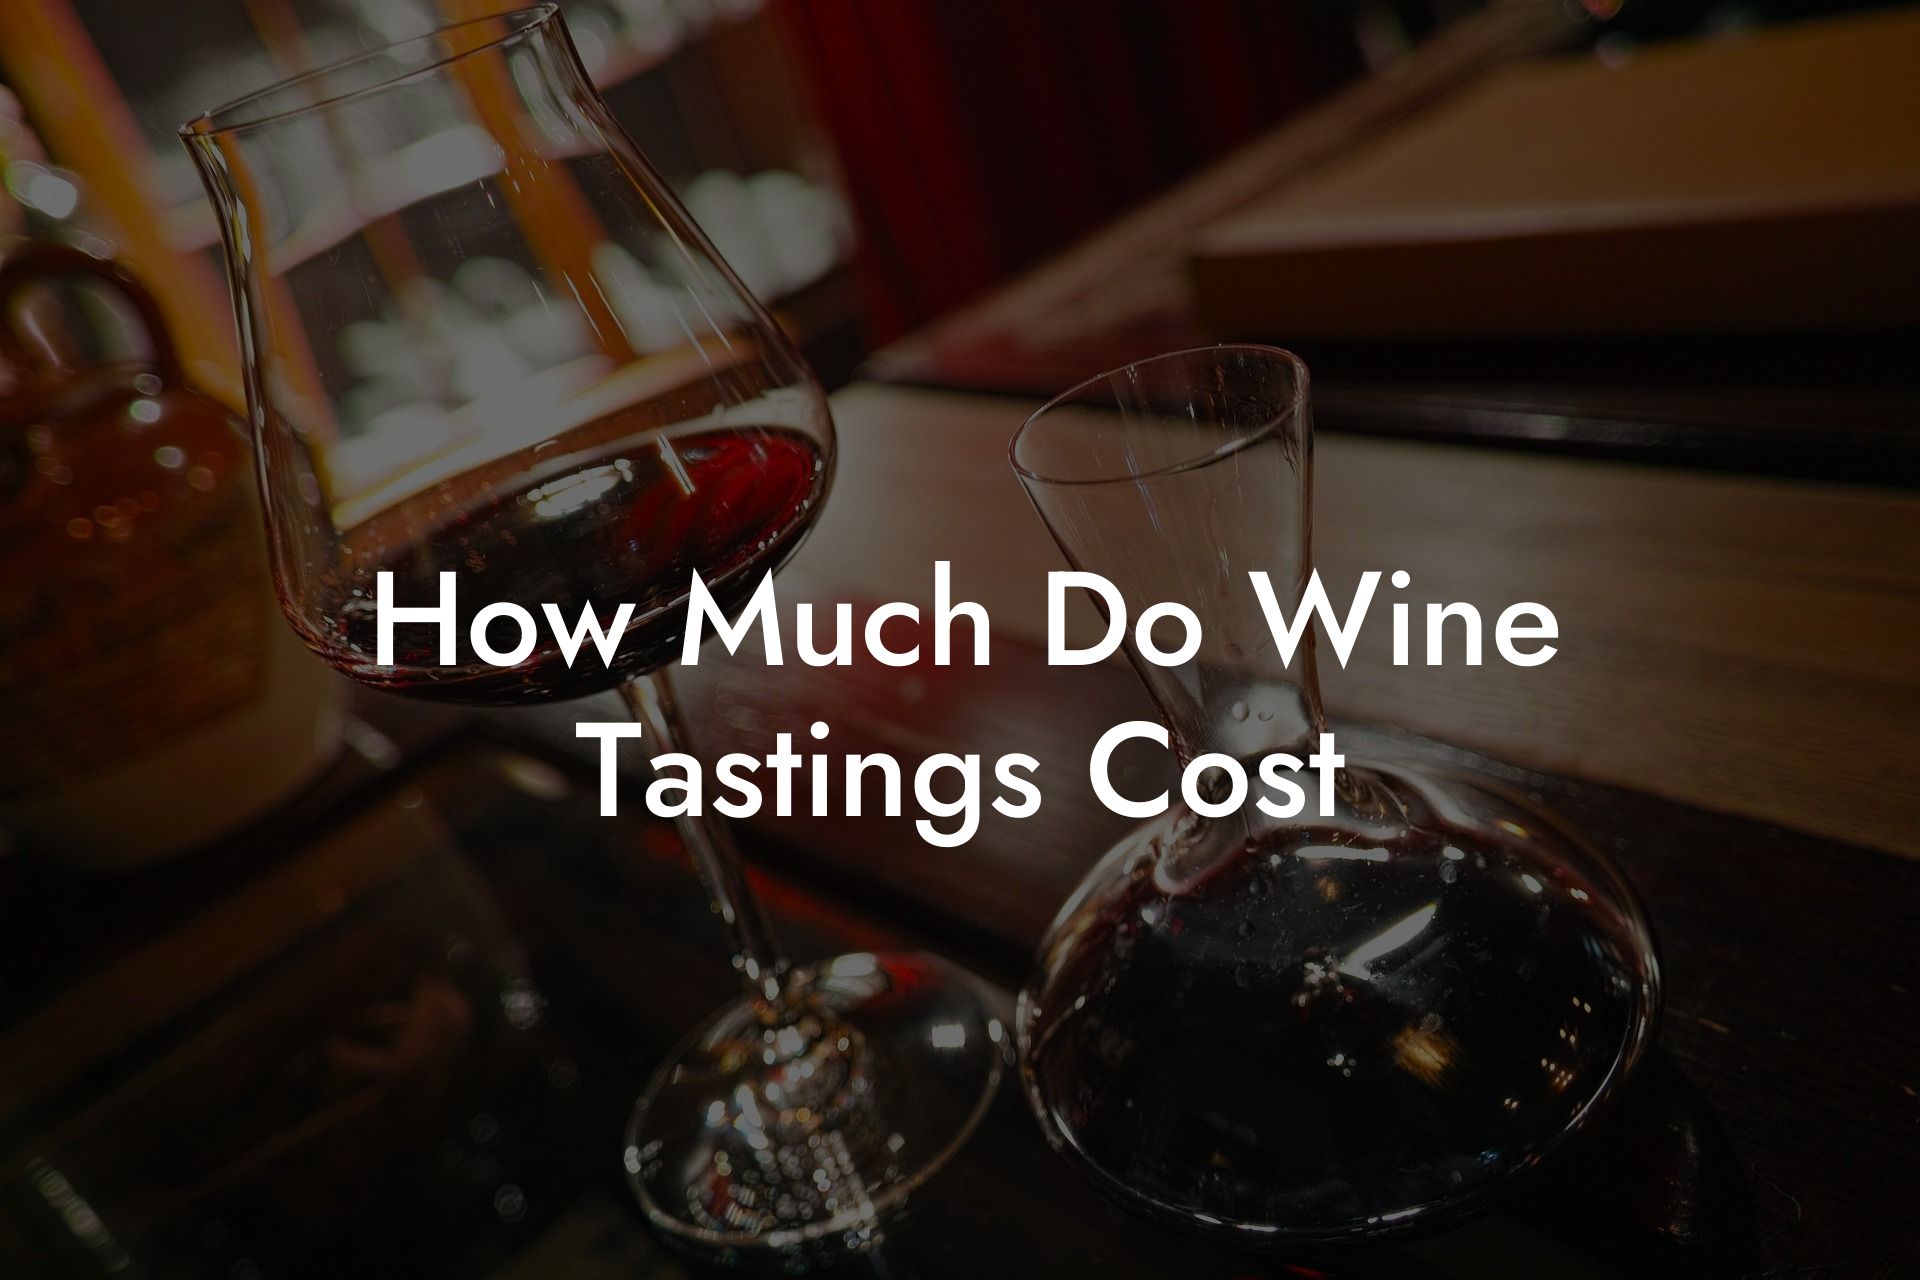 How Much Do Wine Tastings Cost